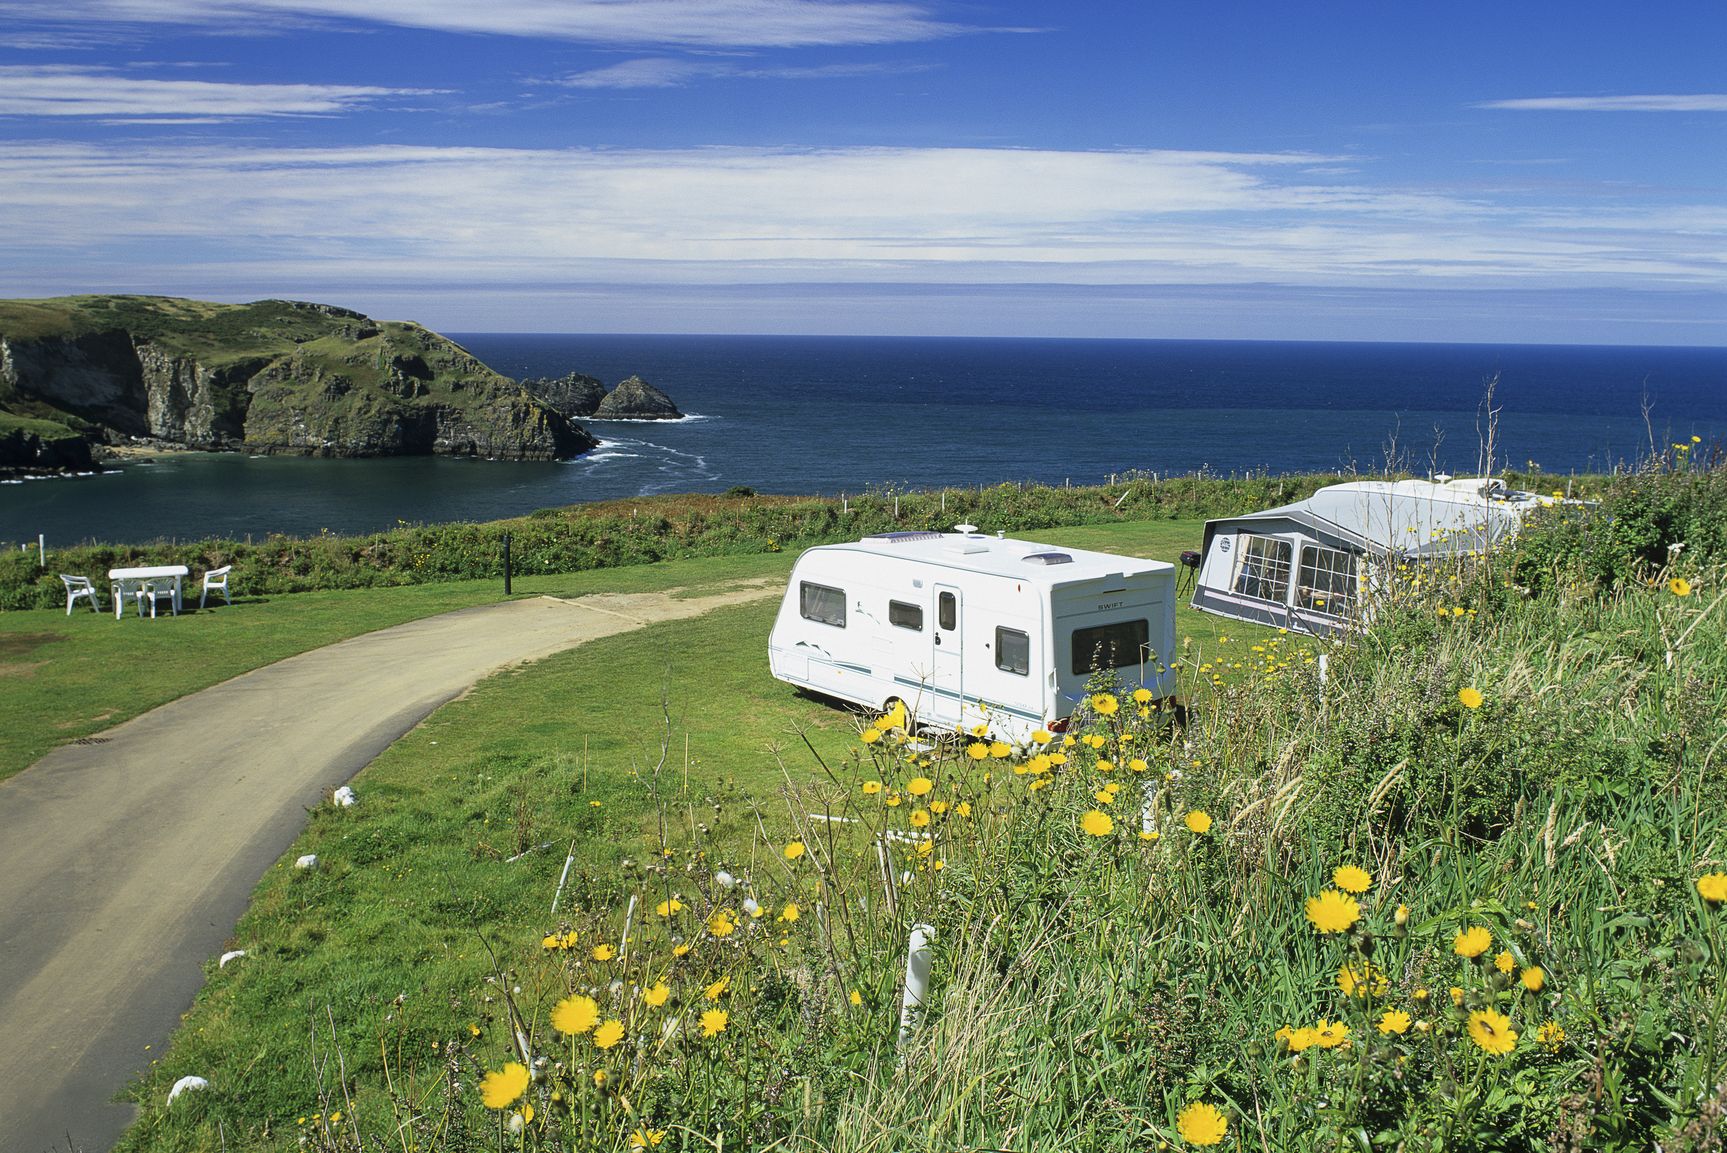 Trewethett Farm Caravan Club Site, Cornwall, England. Caravans with breathtaking views to the sea as the site boasts a cliff top setting, overlooking Bossiney Cove with its safe and sandy beach.